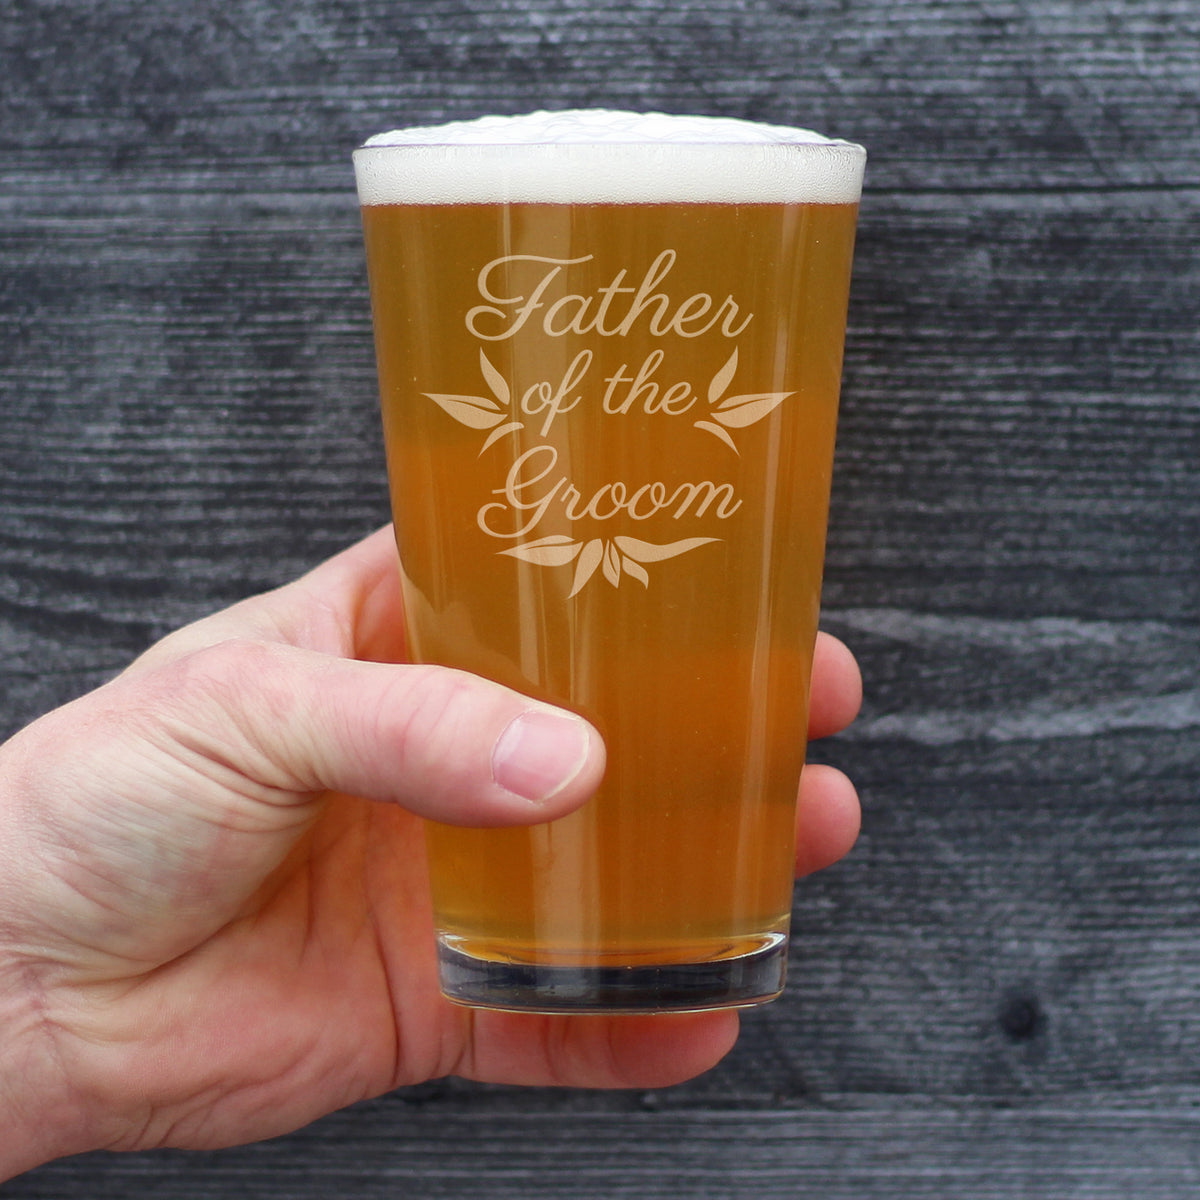 Father of the Groom Pint Glass - Unique Wedding Gift for Soon to Be Father-in-Law - Cute Engraved Wedding Cup Gift